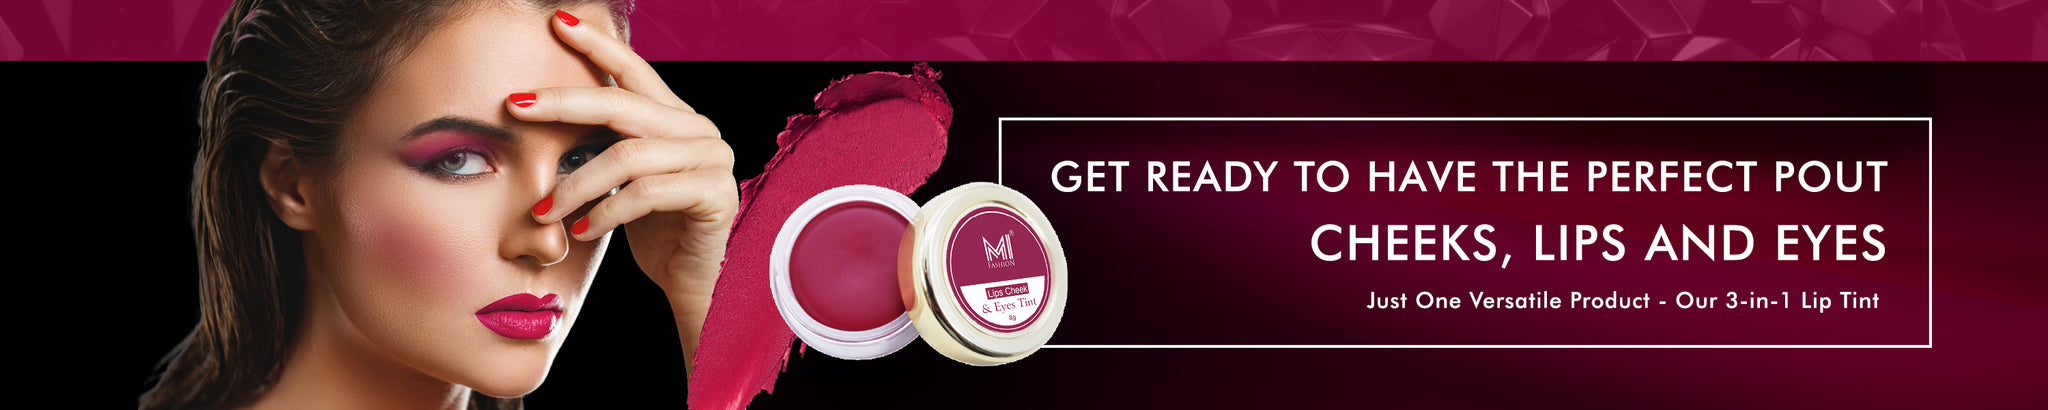 Get Pop of Color Look with MI Fashion's 3-in-1 Lip Tint - Shop Now!